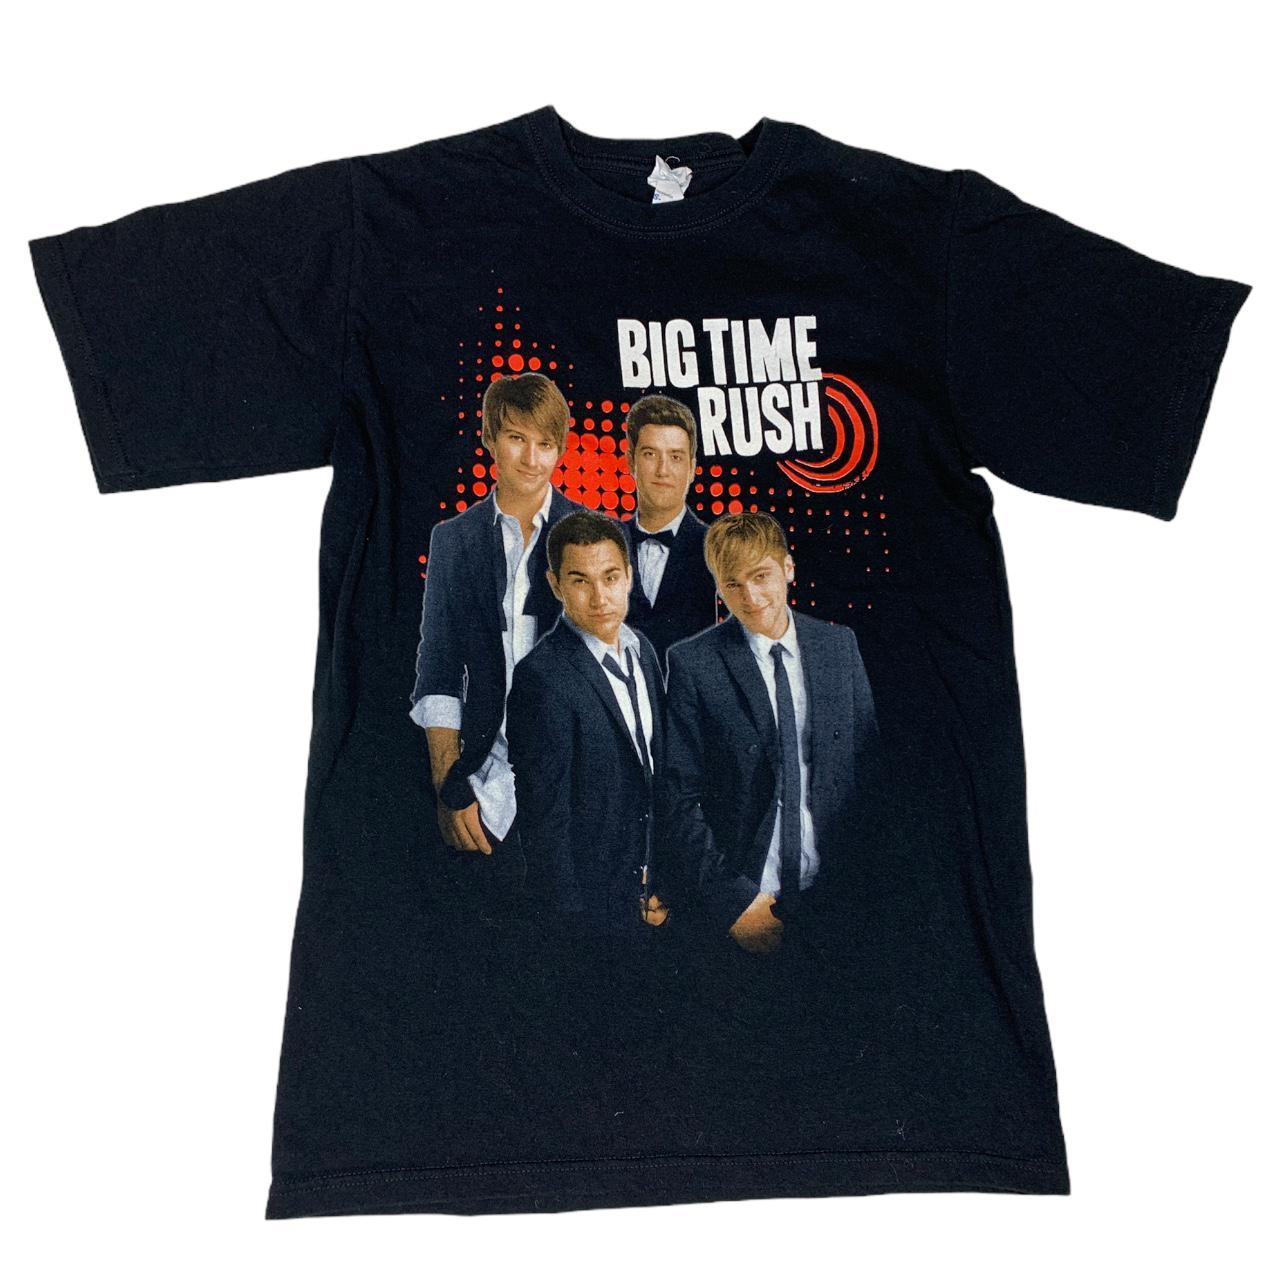 Product Image 1 - BTR TEE

This late y2k era